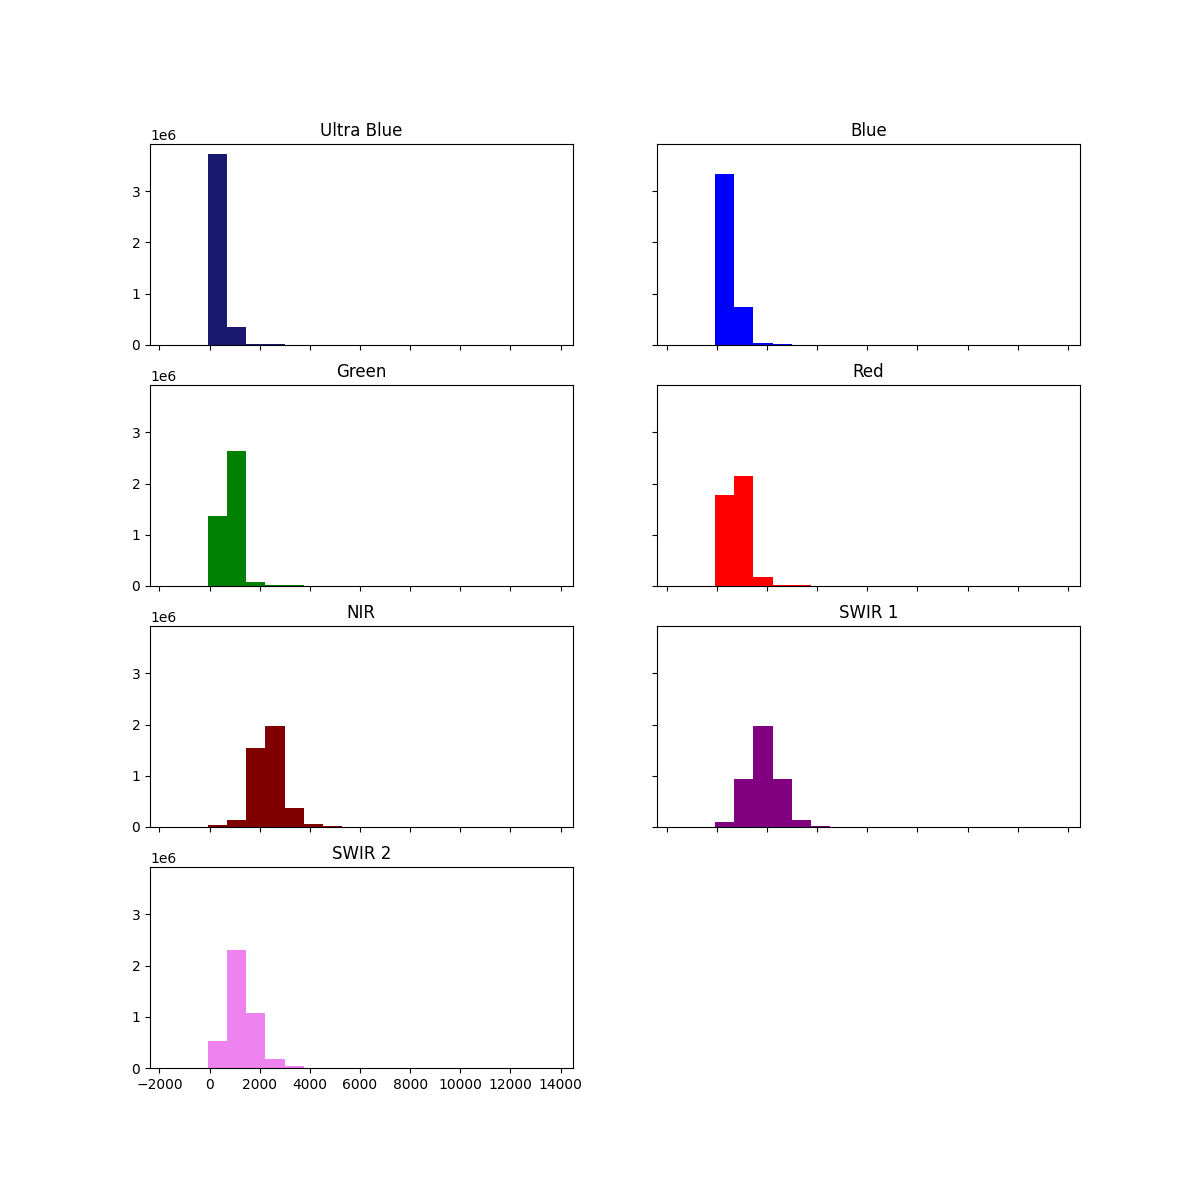 ../_images/sphx_glr_plot_hist_functionality_001.png